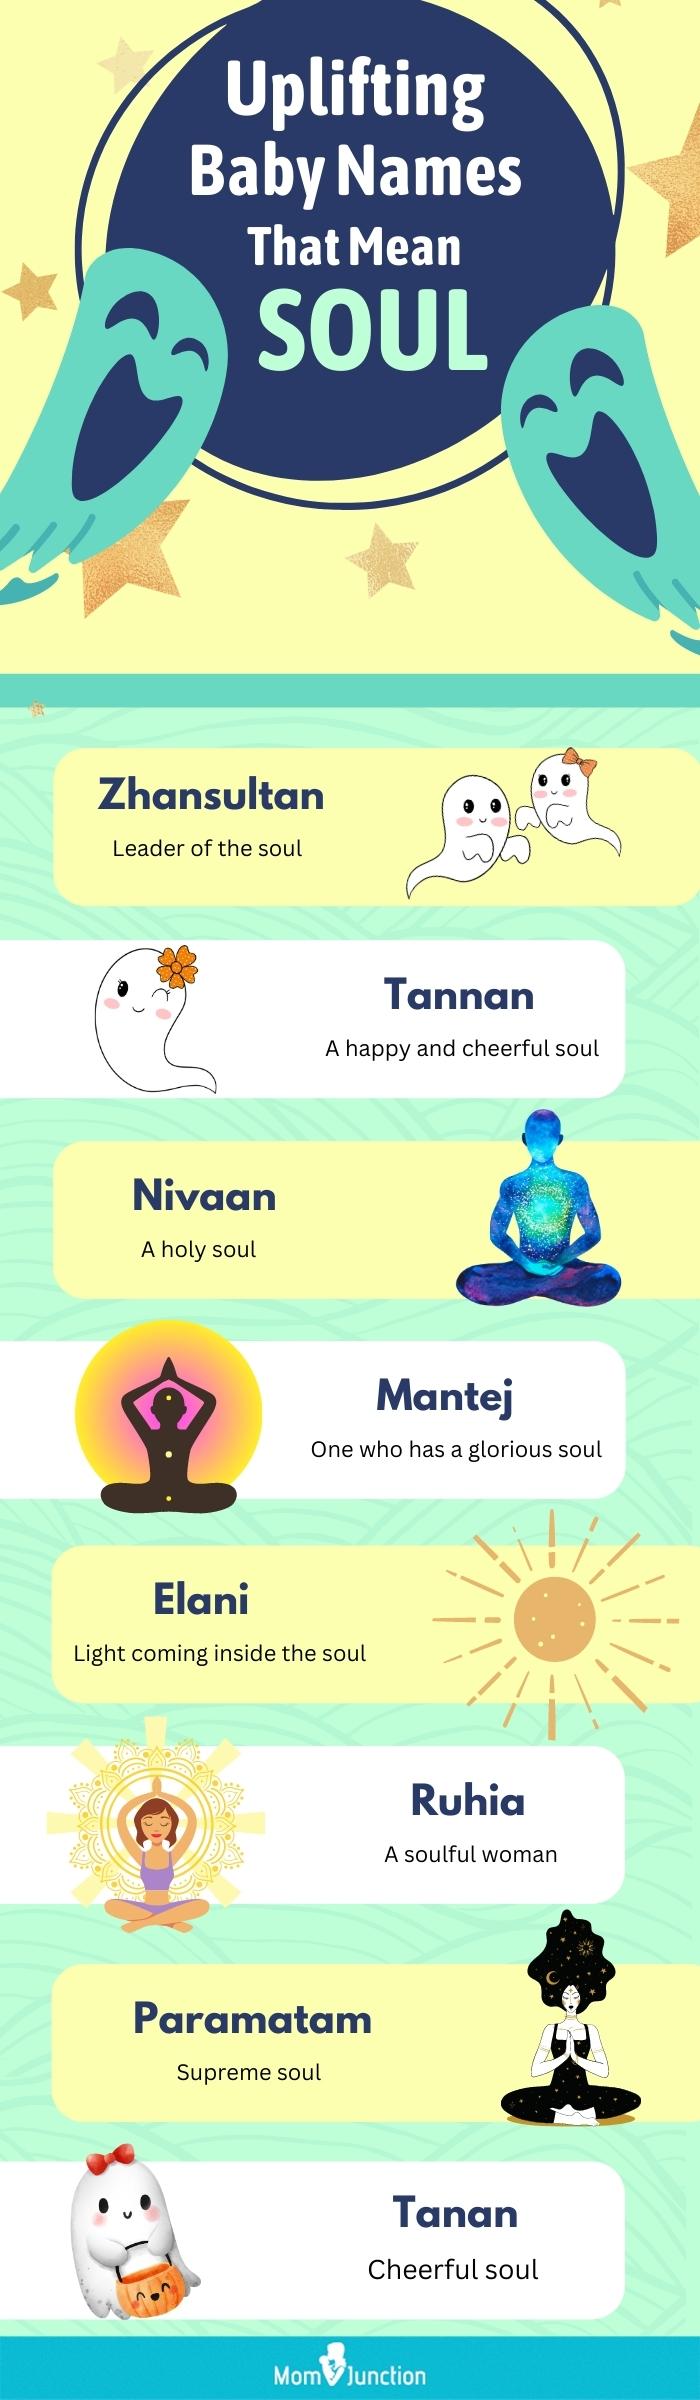 uplifting baby names that mean soul (infographic)